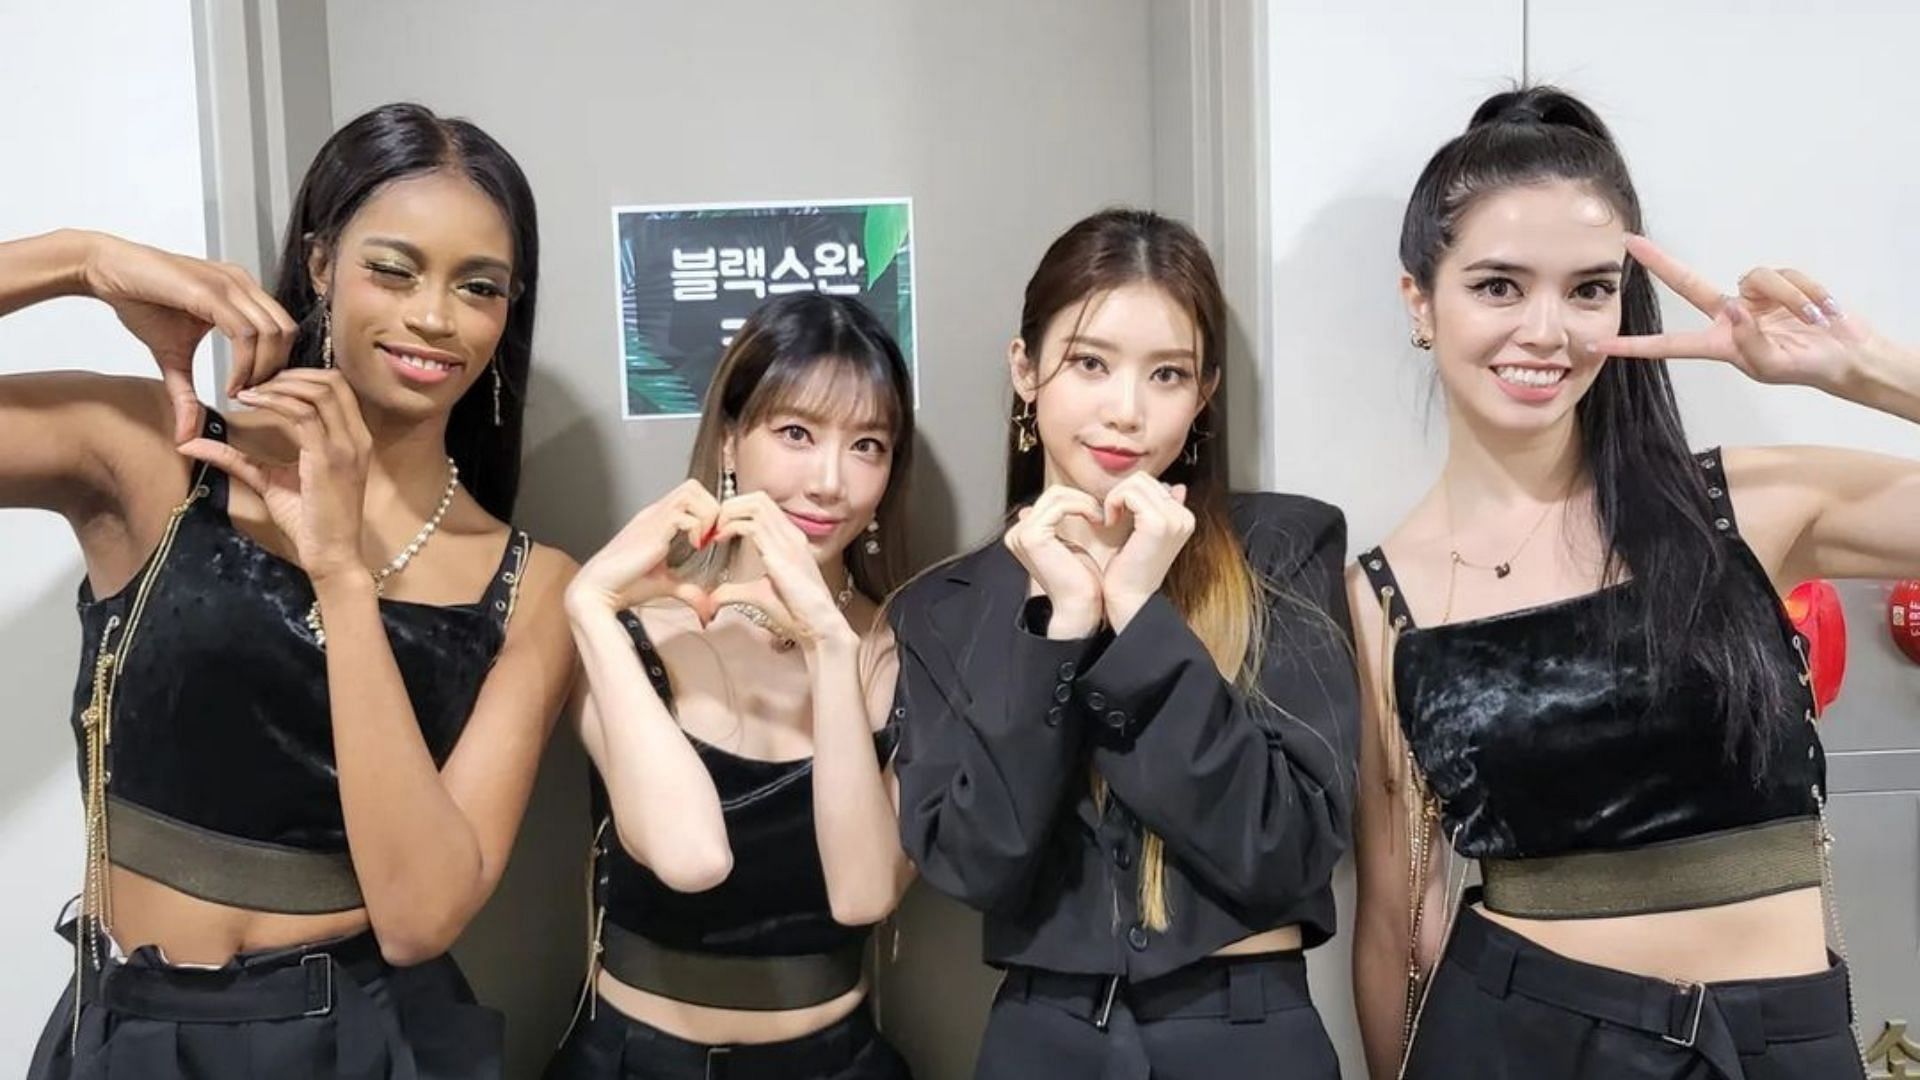 From left to right: BLACKSWAN members Fatou, Youngheun, Judy and Leia (Image via Instagram/blackswan__official)